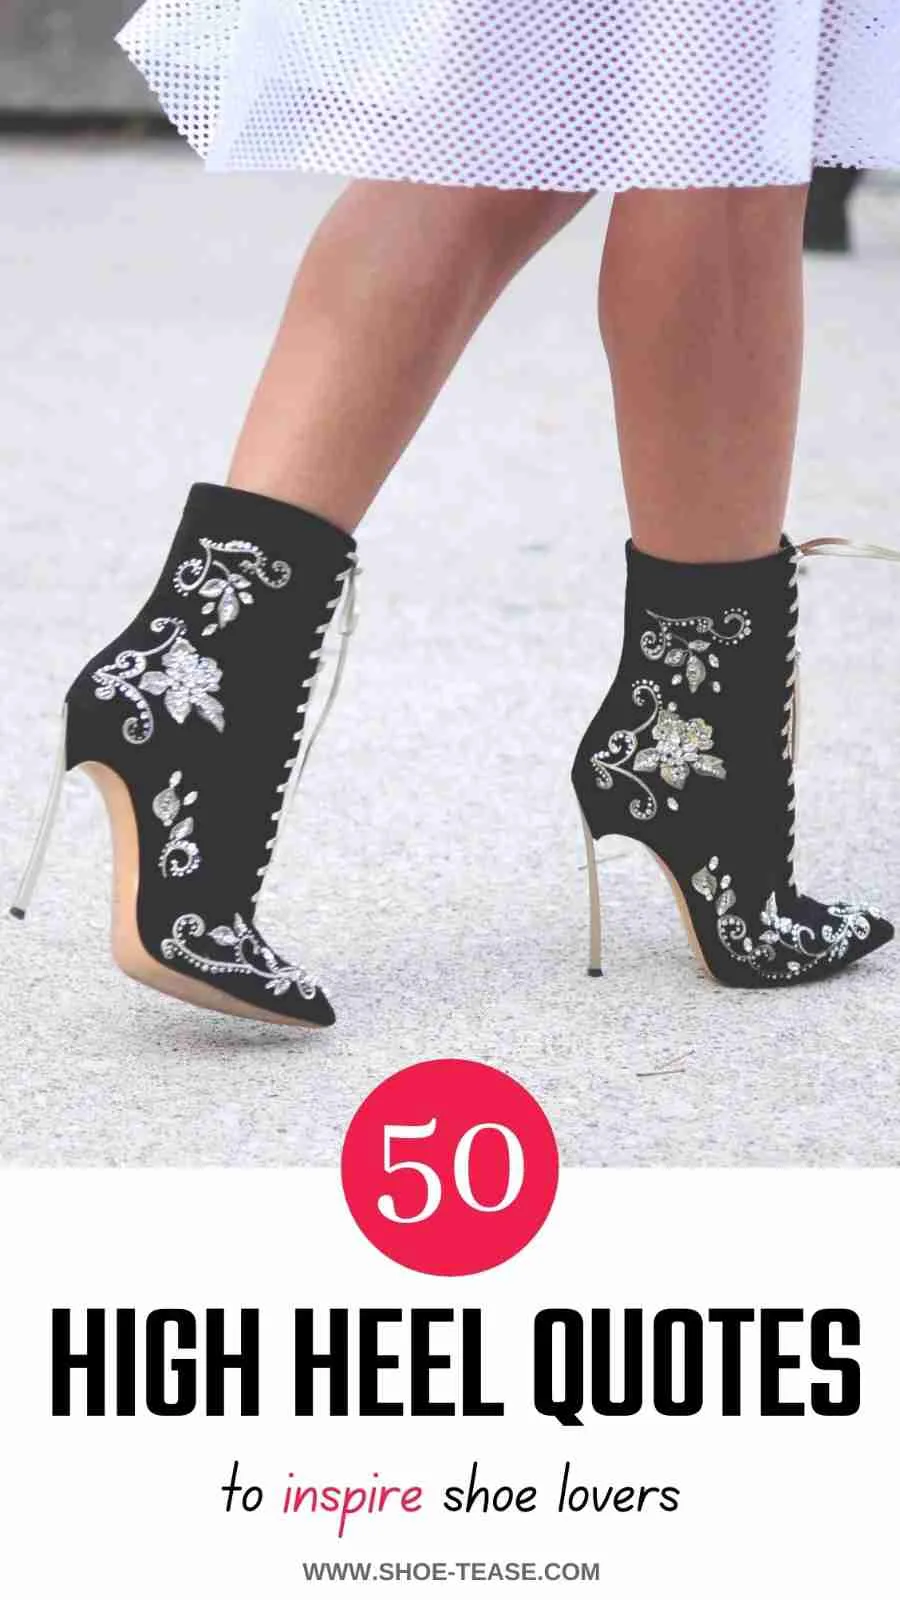 84 Songs About Shoes, High Heels, and Boots - Spinditty